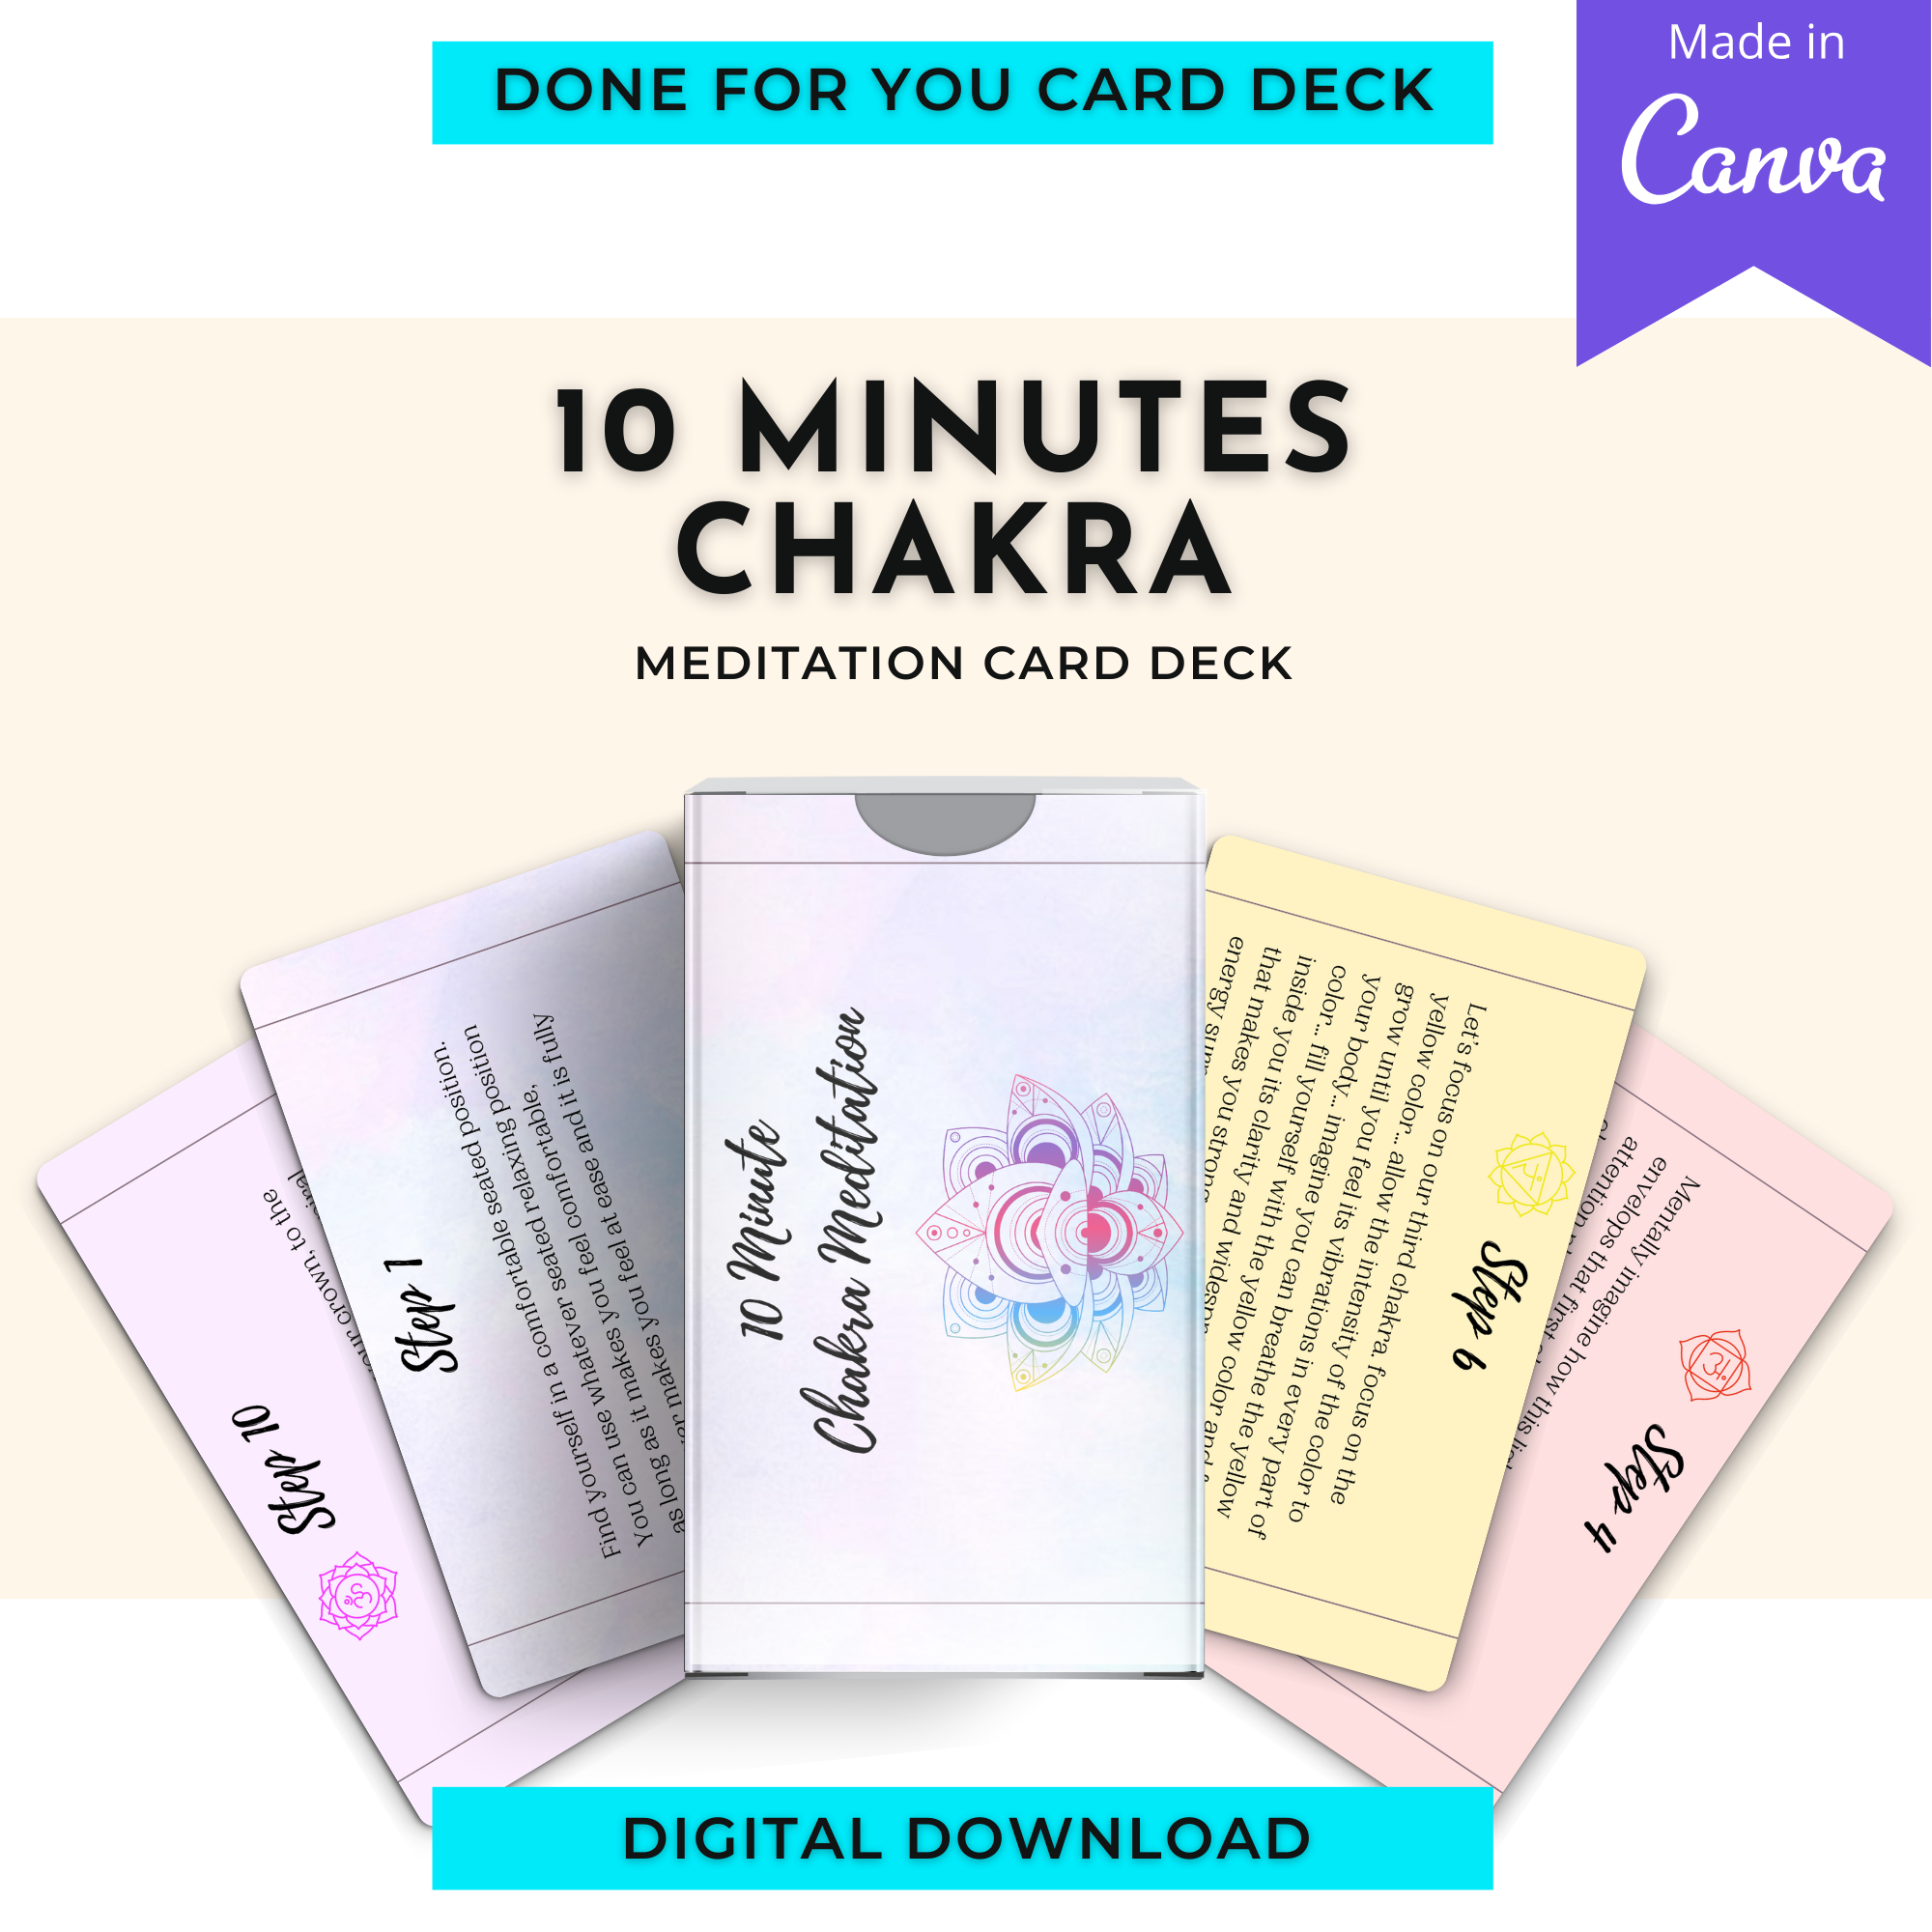 10 Minute Chakra Meditation Card Deck | Editable 16 Card Deck in Canva | Commercial Use